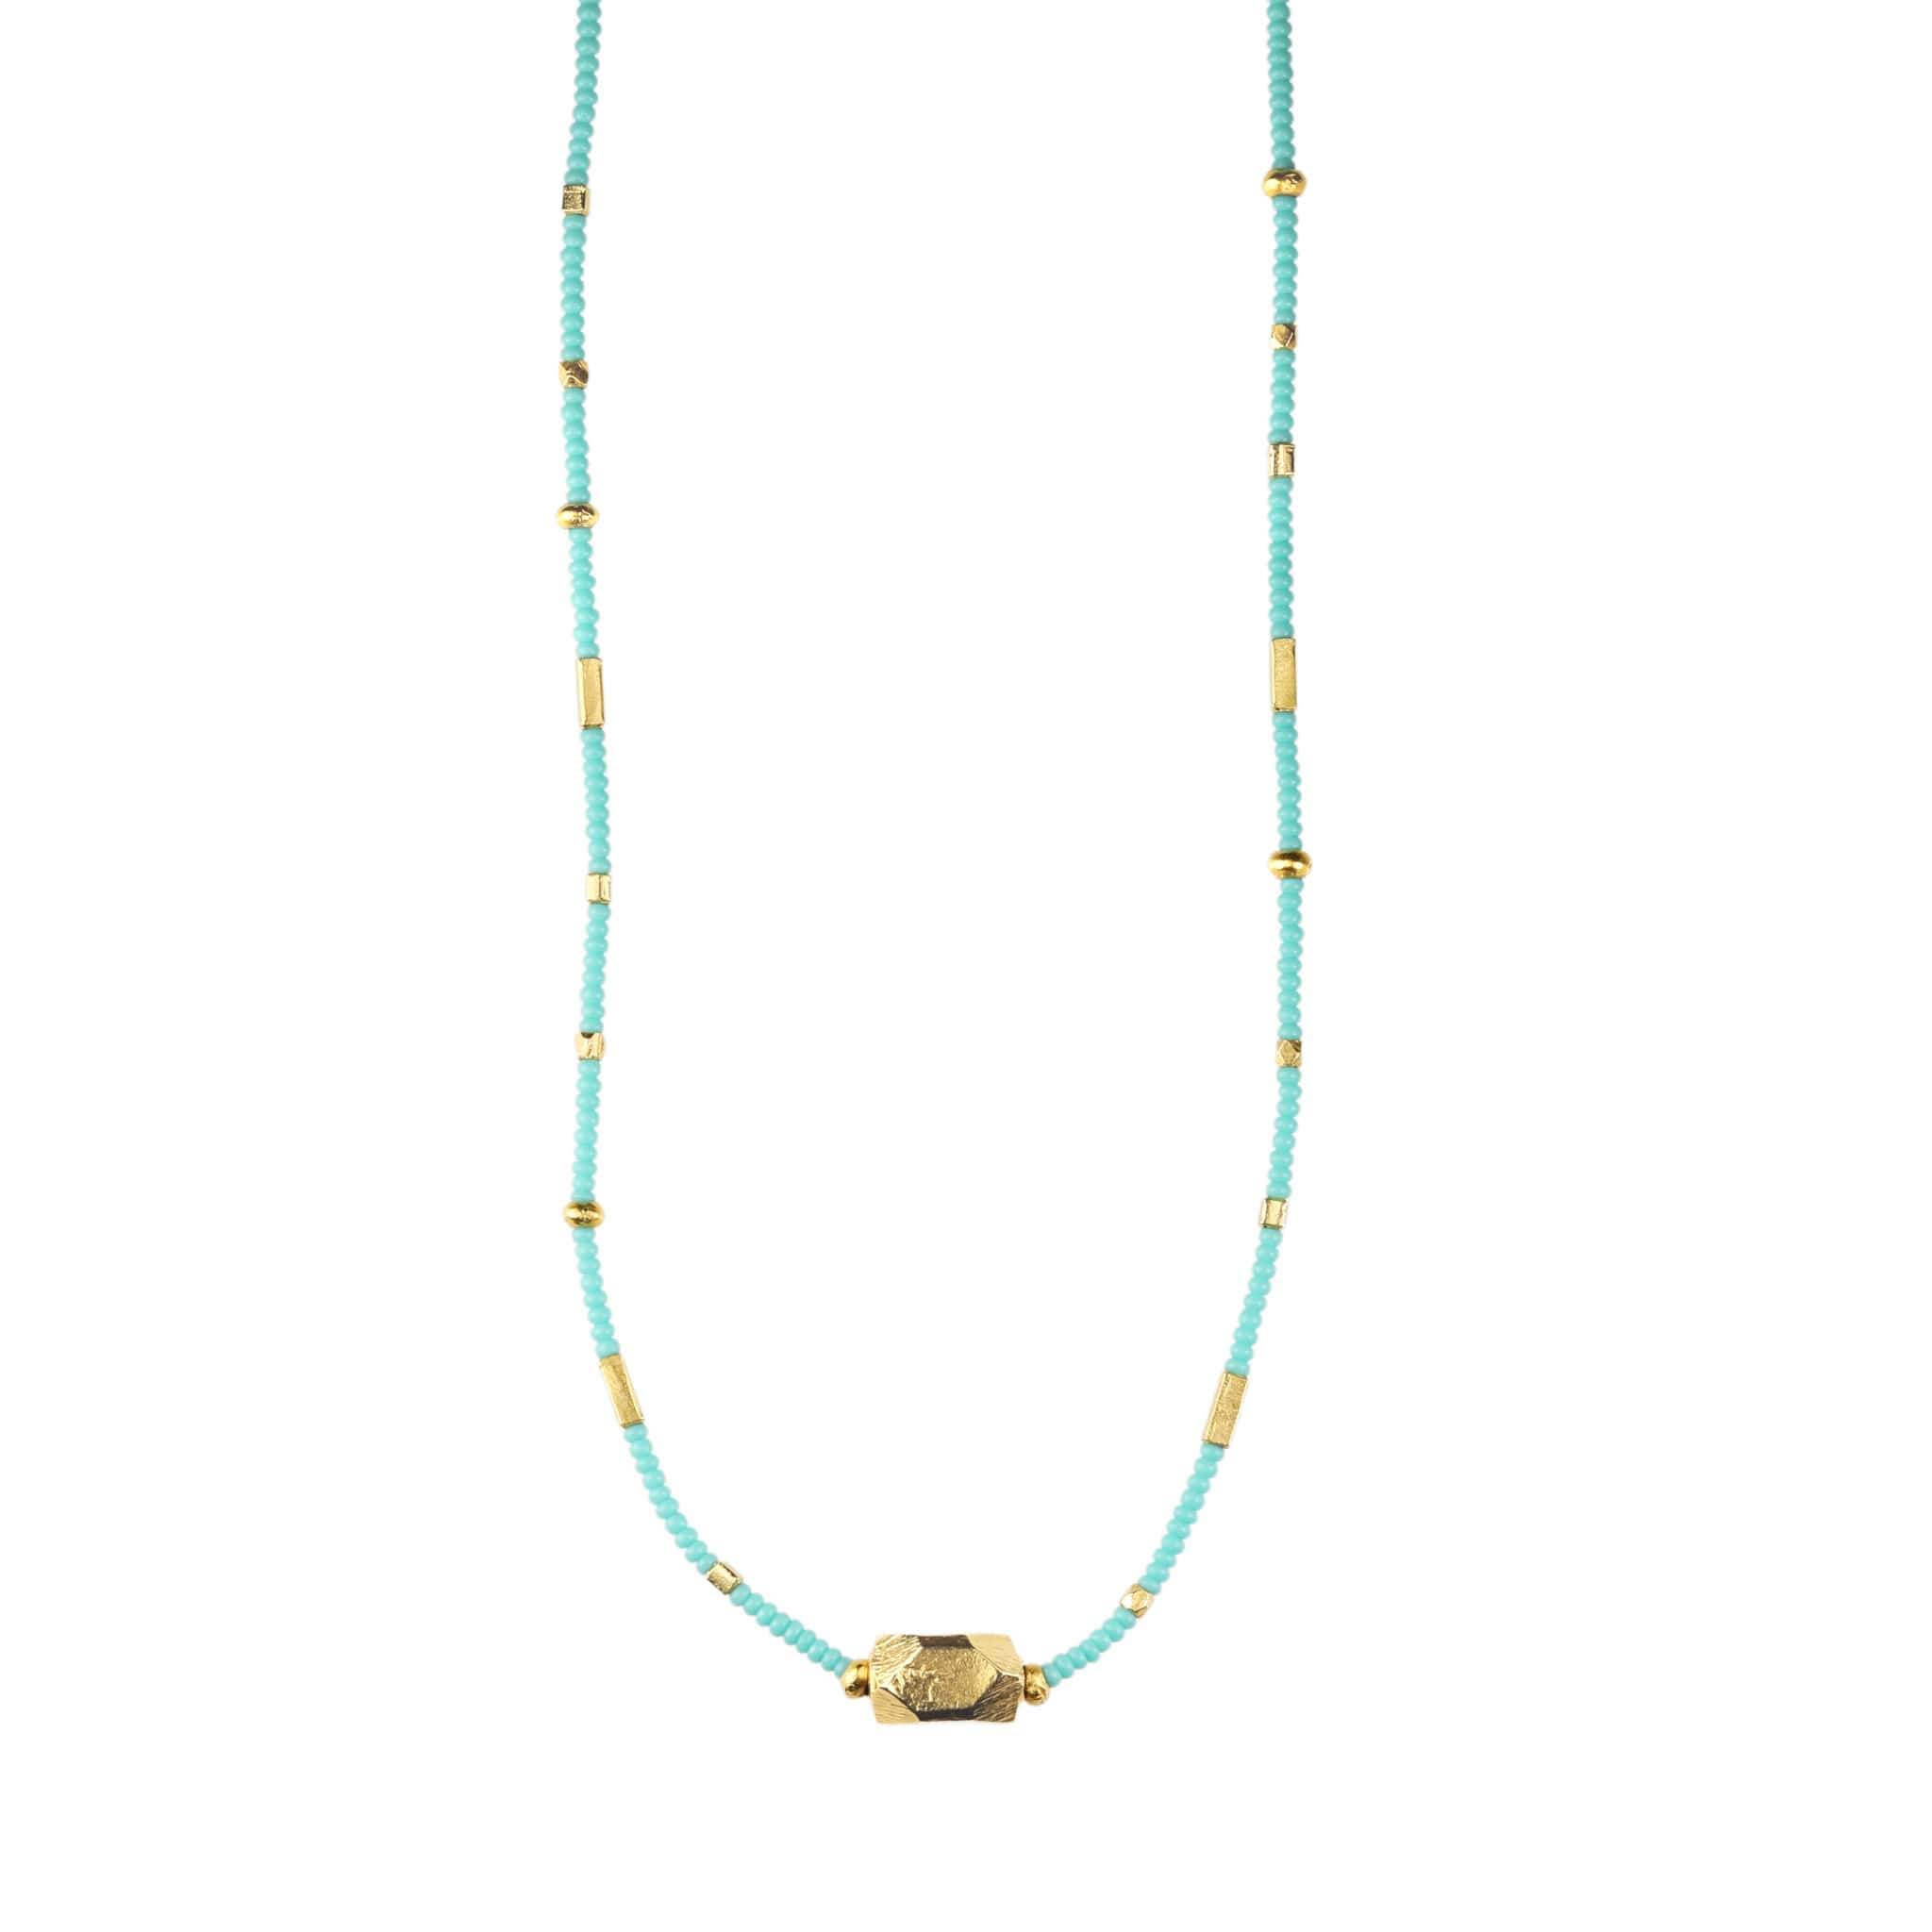 Debbie Fisher Turquoise Necklace with Multi-Shape Gold Vermeil Beads &amp; Large Centerpiece